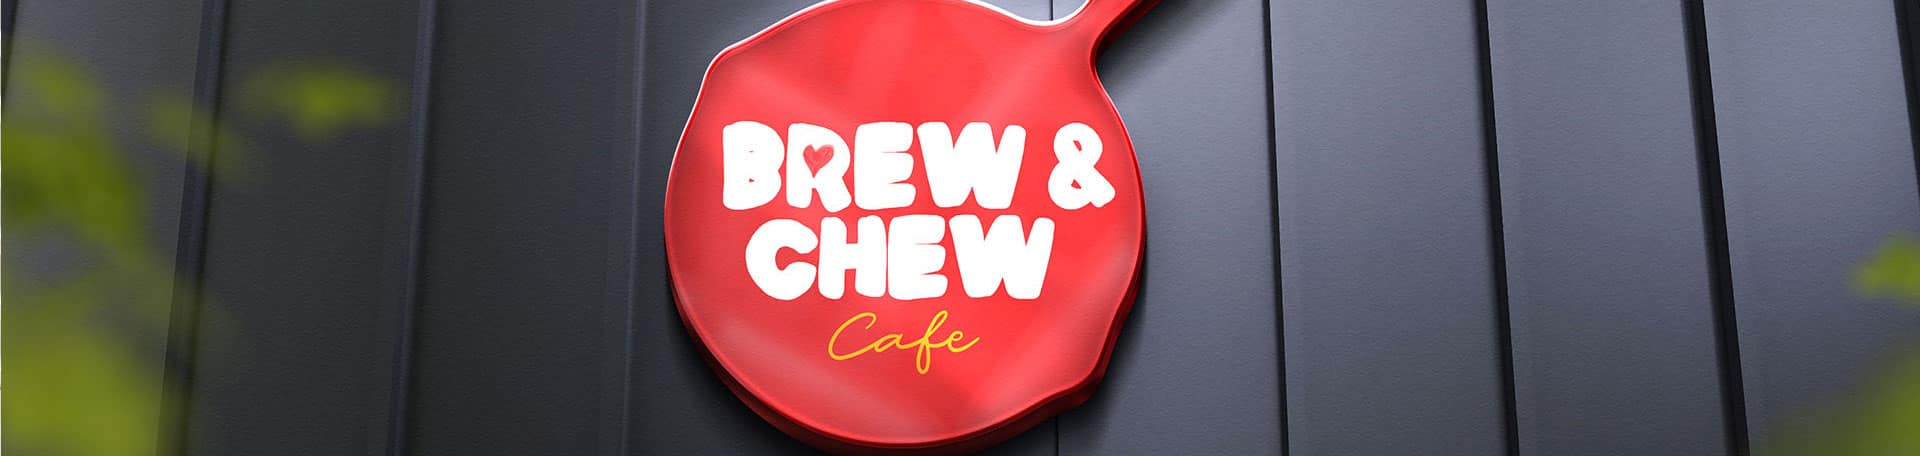 Case Study on Brew & Chew Cafe for Restaurant Branding Company